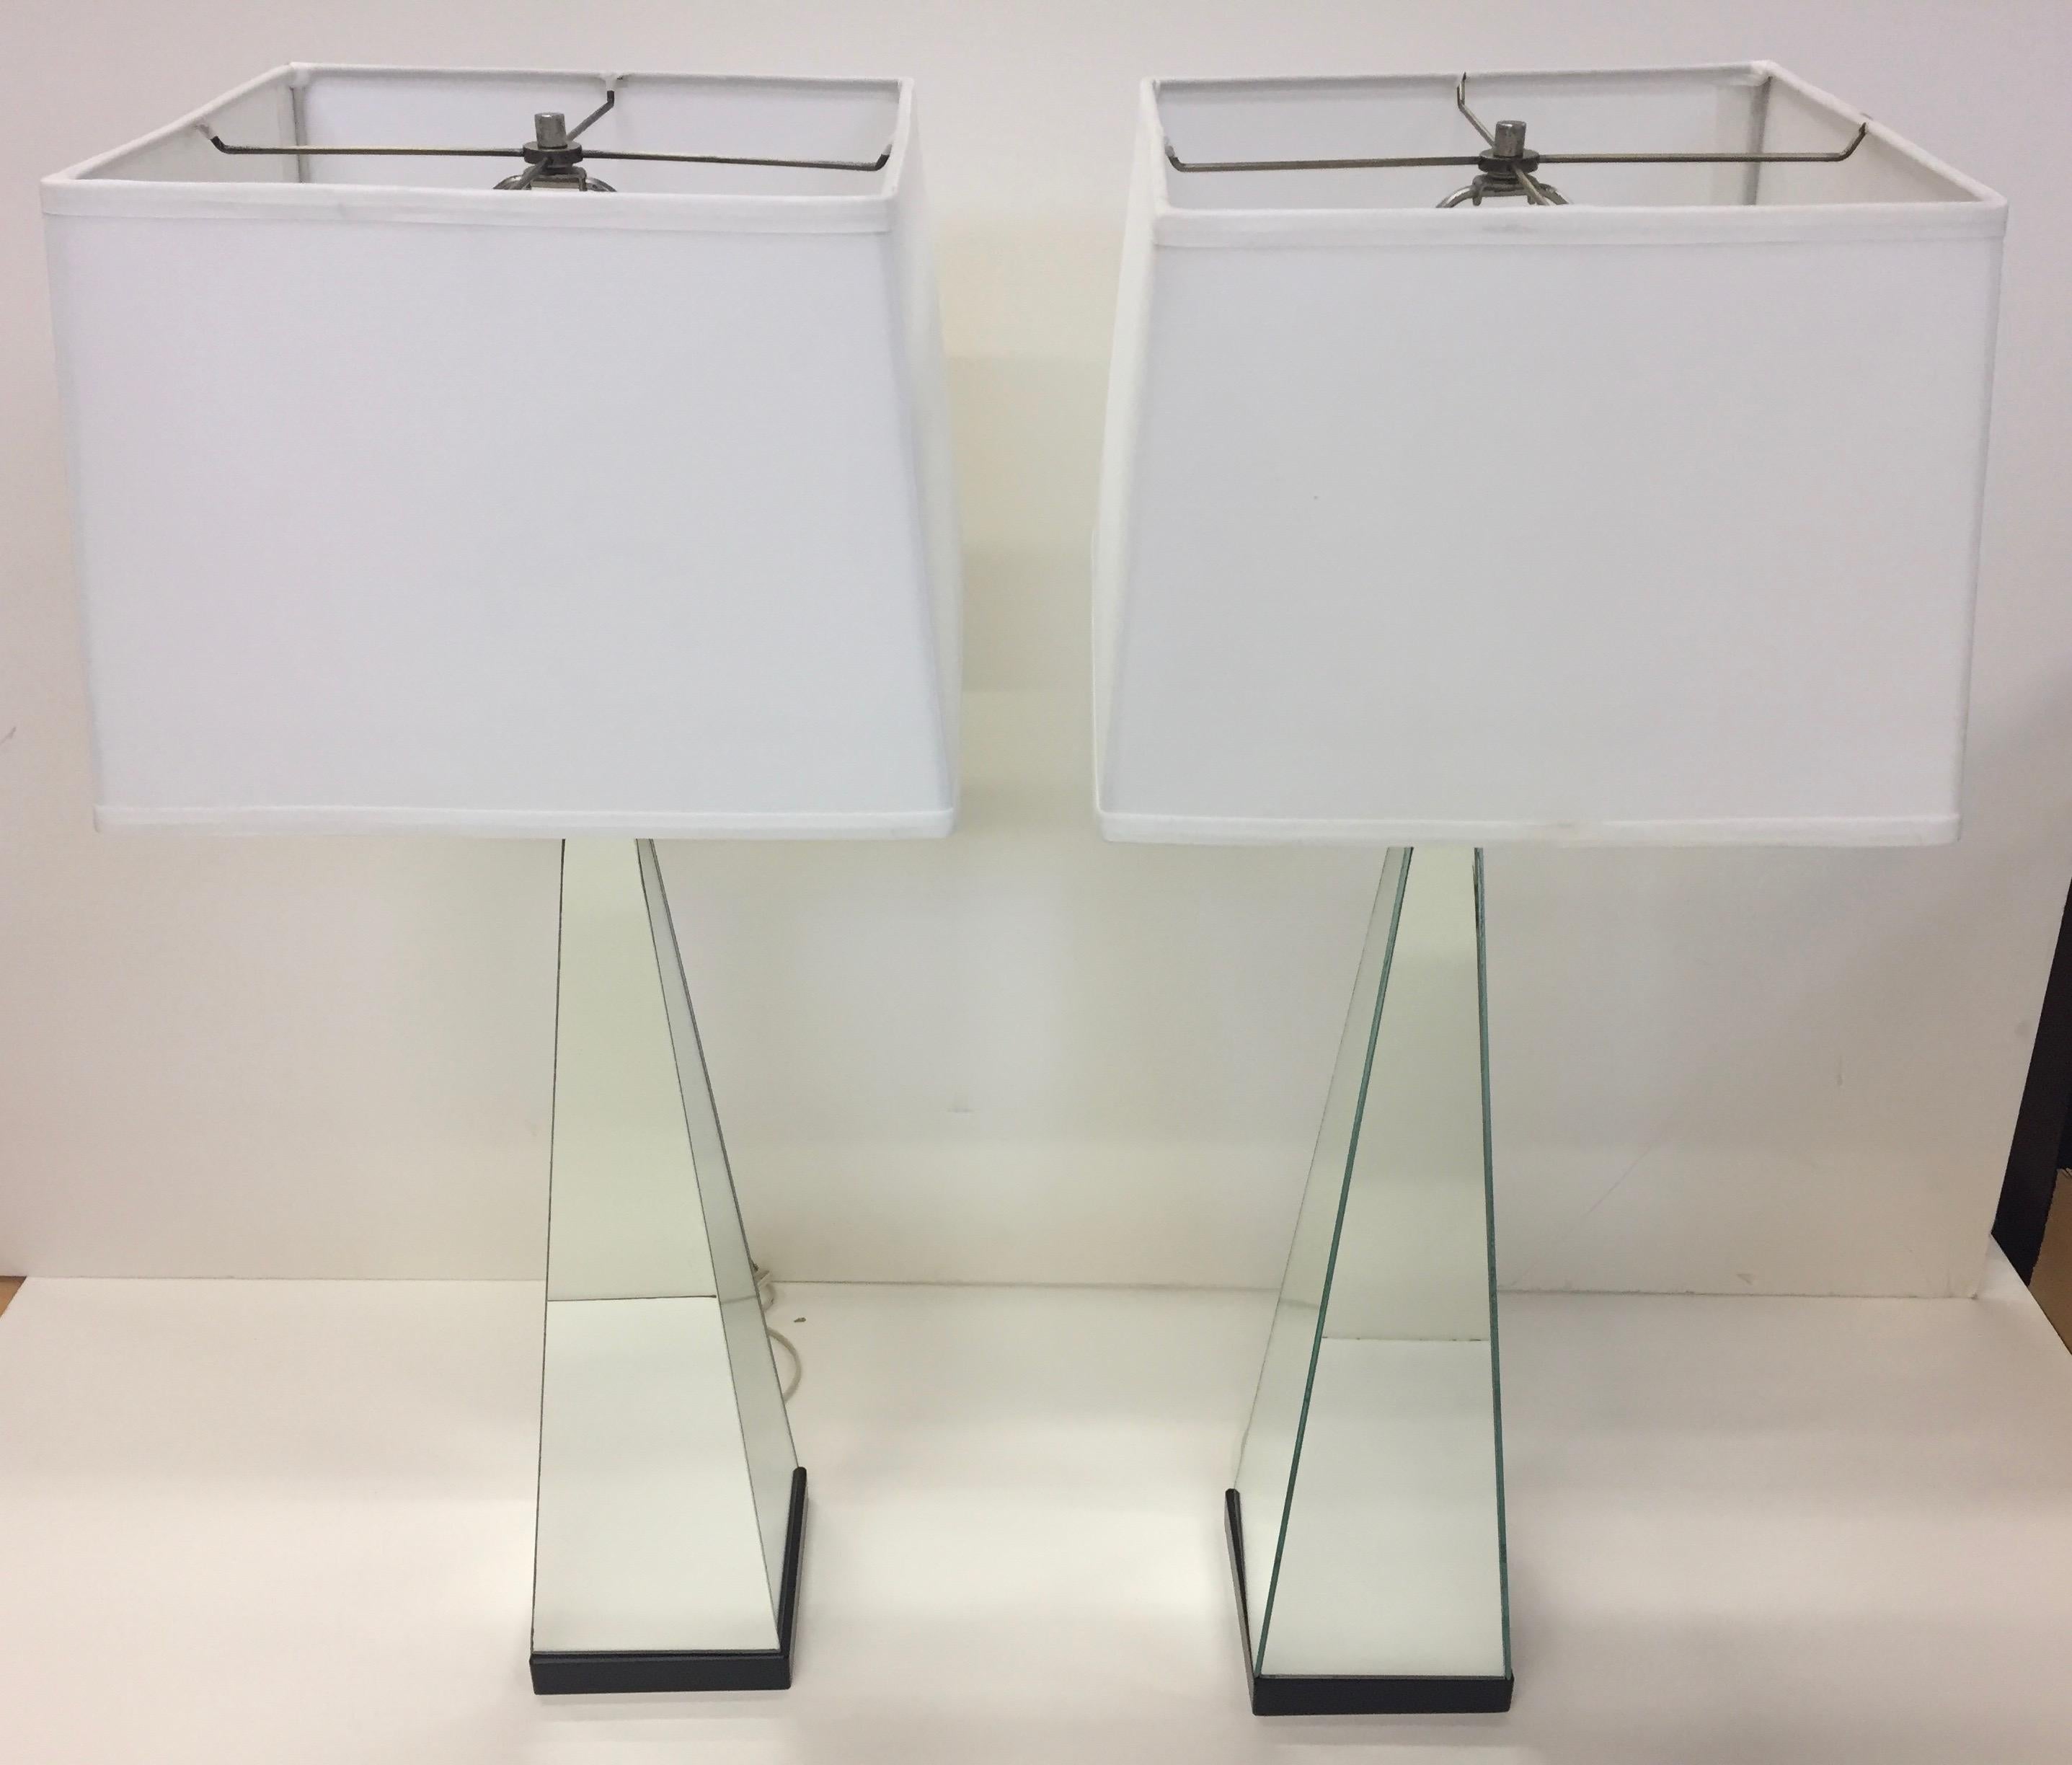 Cool pair of 1960s of mirrored obelisk shaped lamps with black bases.
Shades not included.